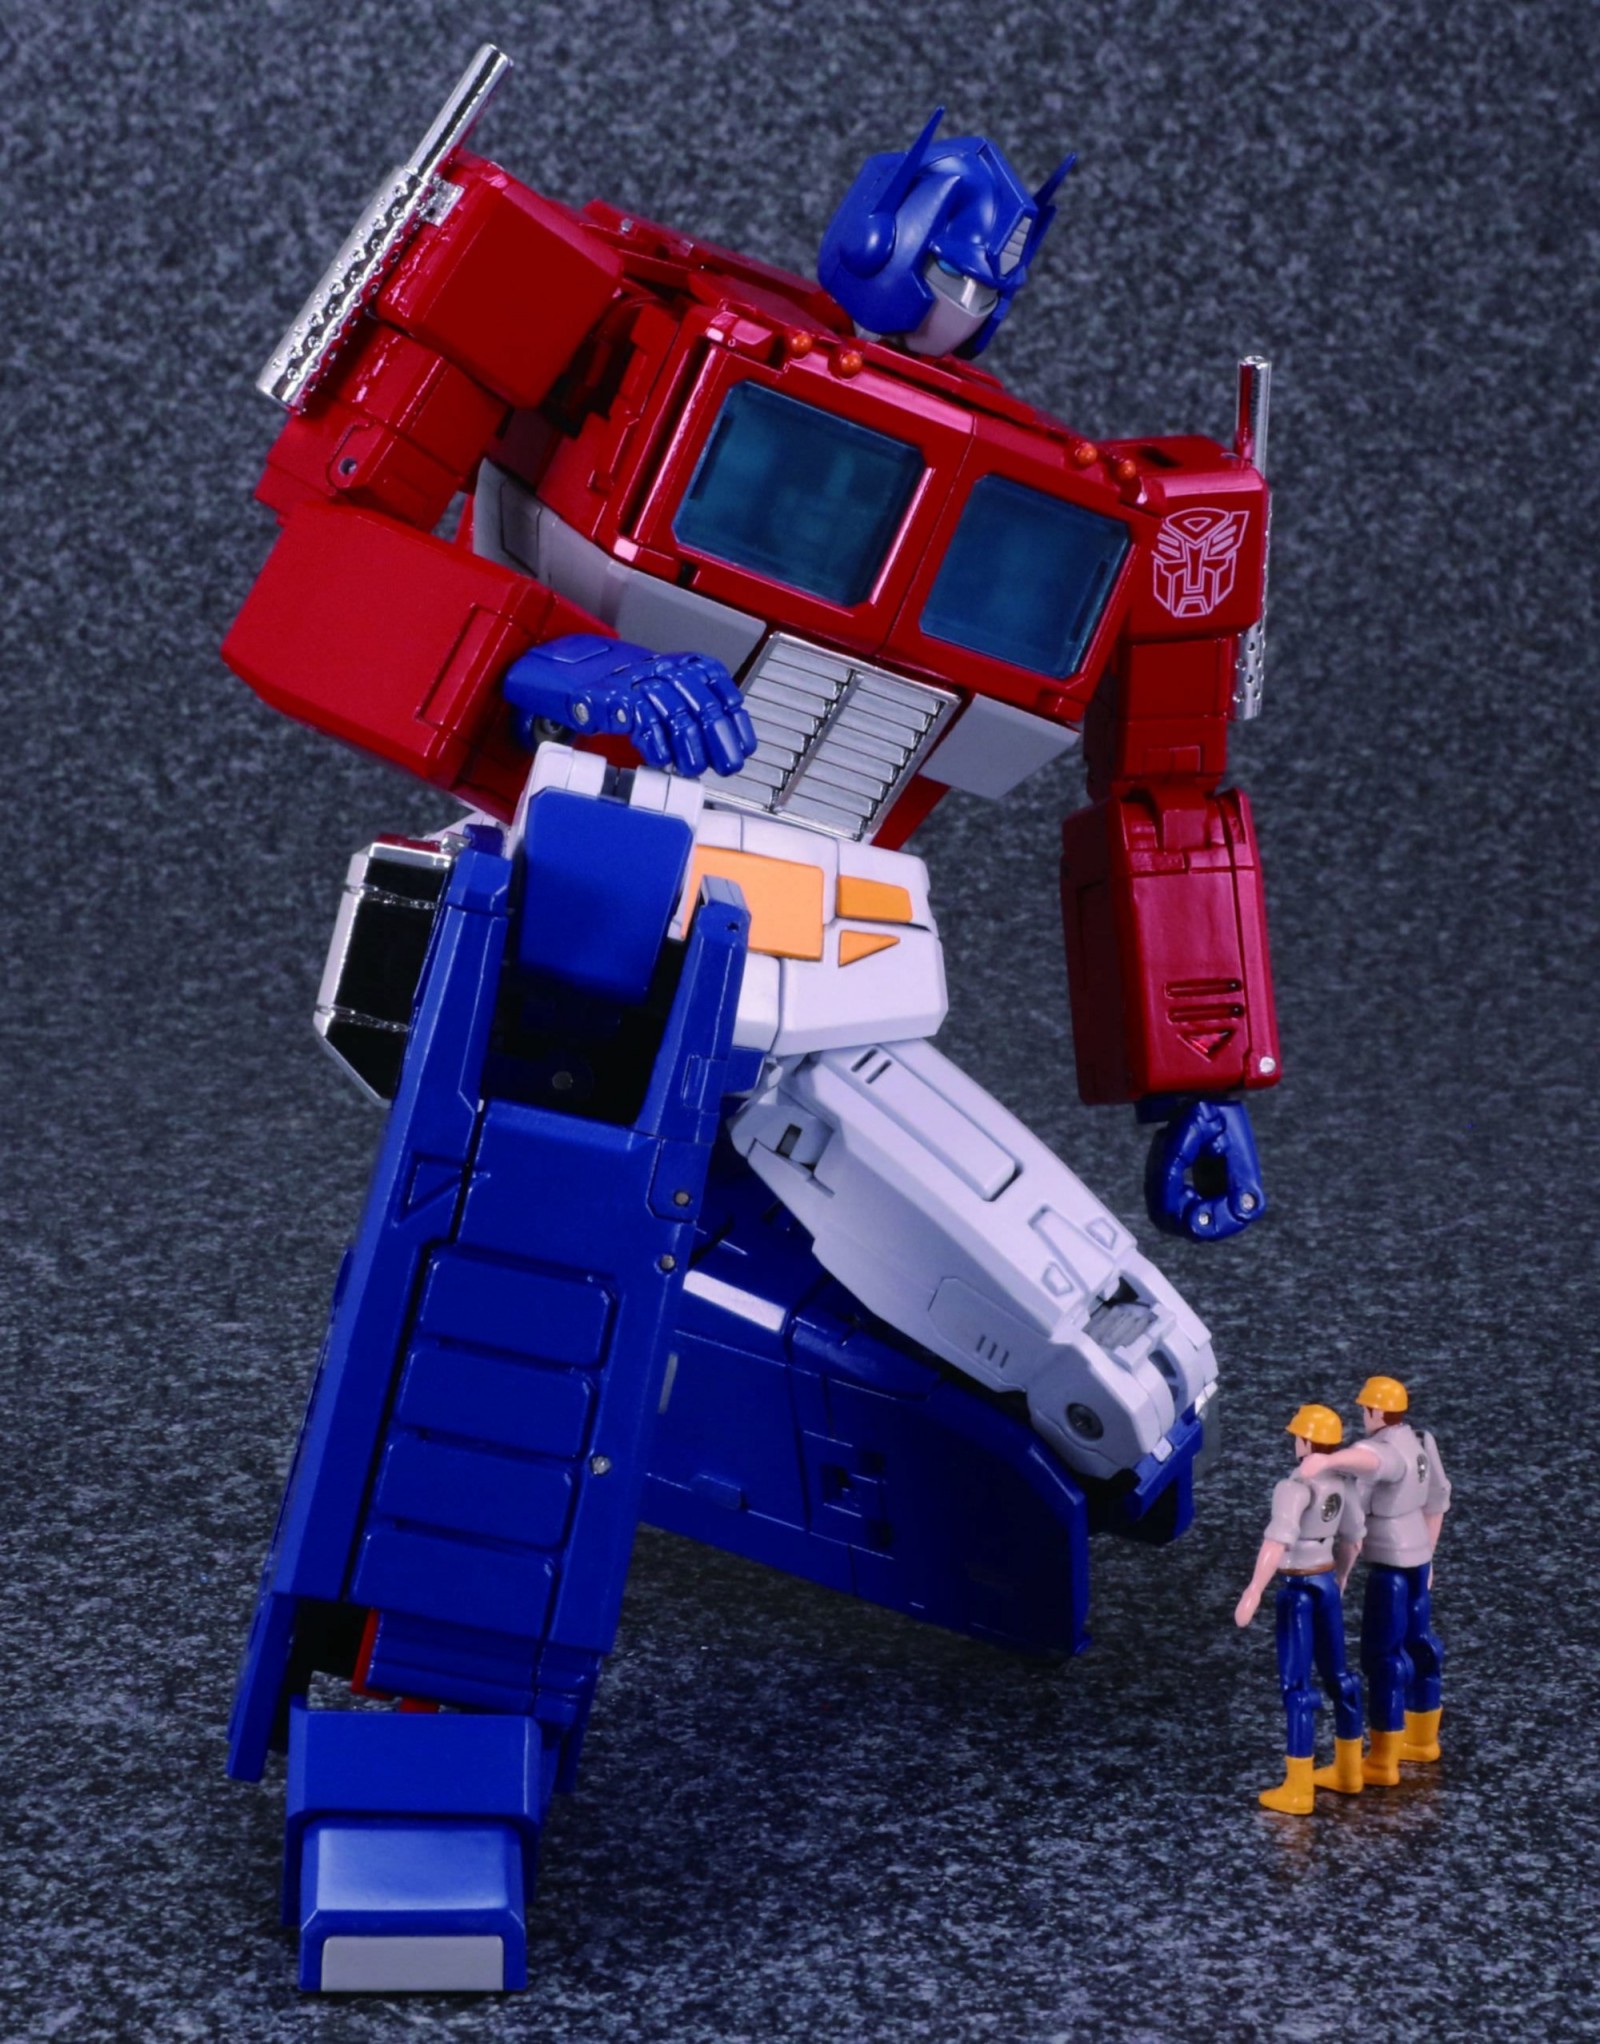 Transformers News: EB Games to get Masterpiece MP-44 Optimus Prime Ver 3 in Canada